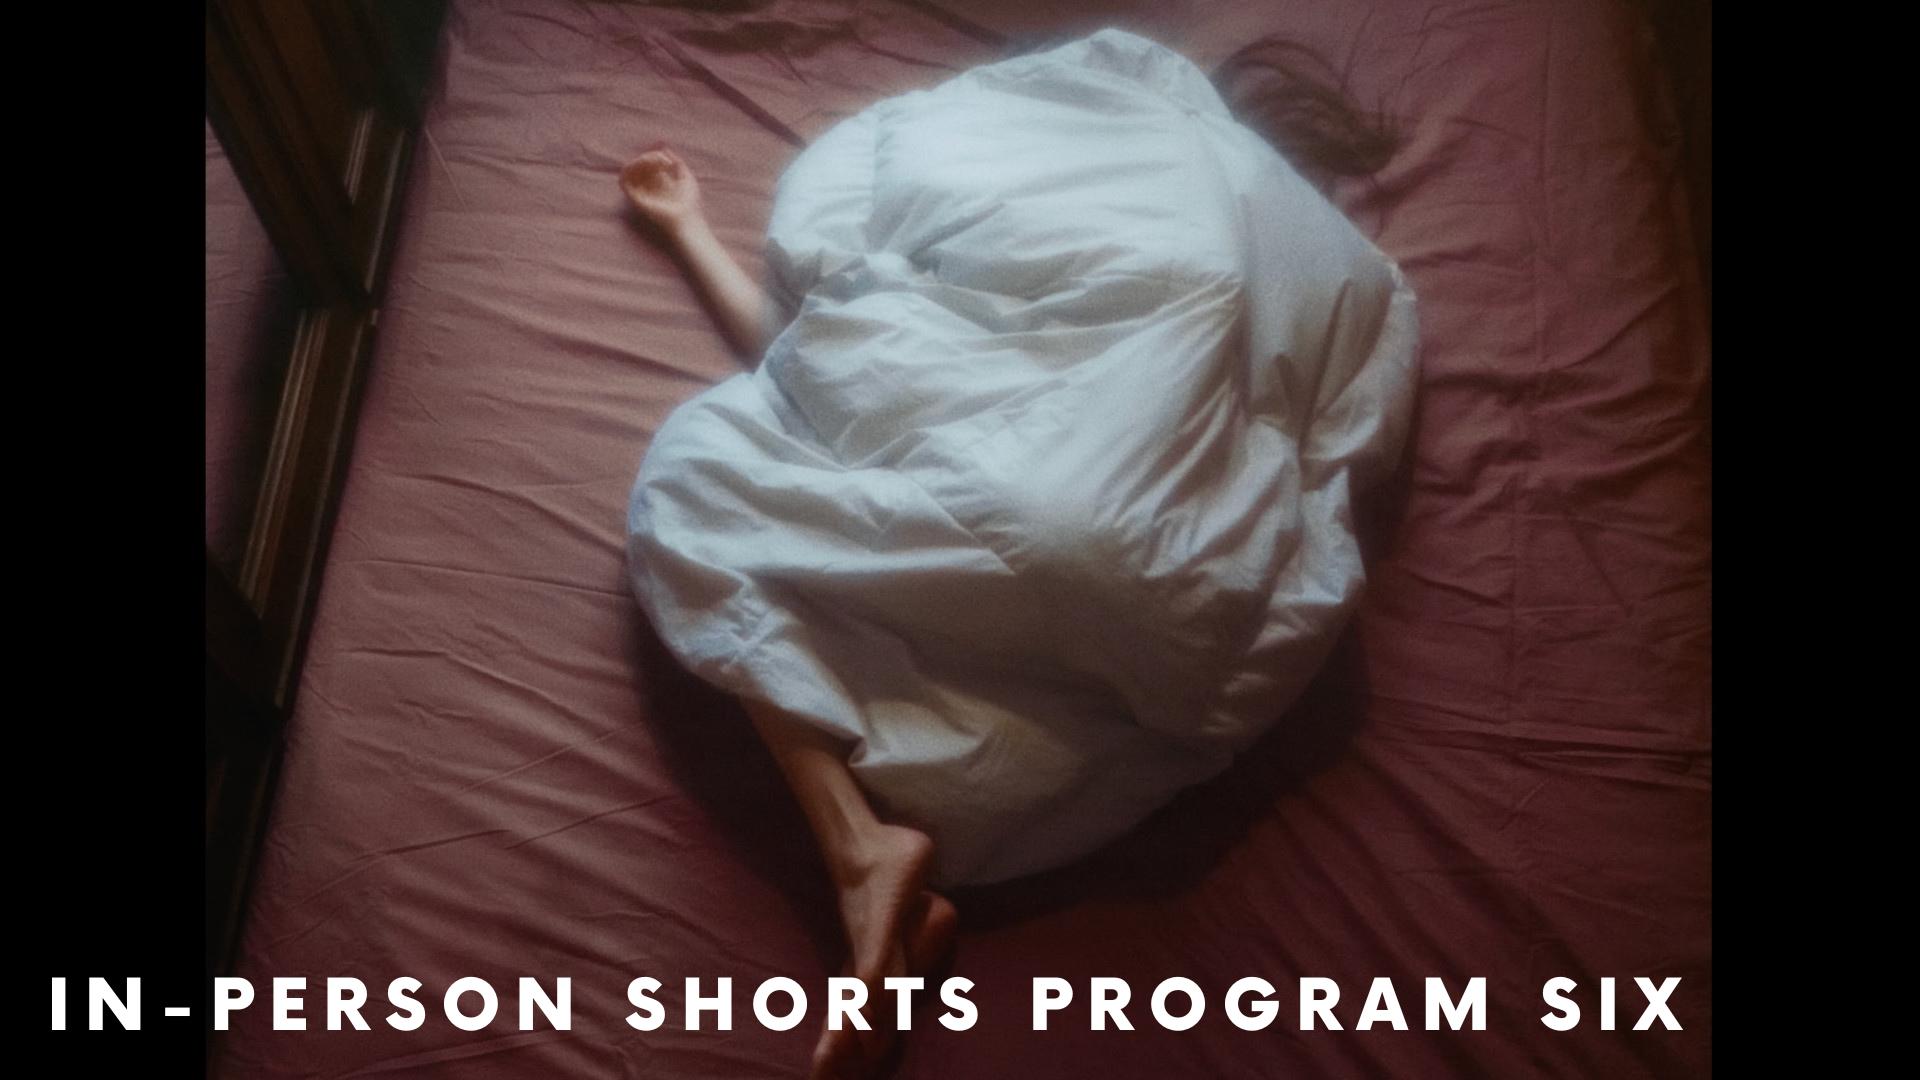 In-Person Shorts Program 6